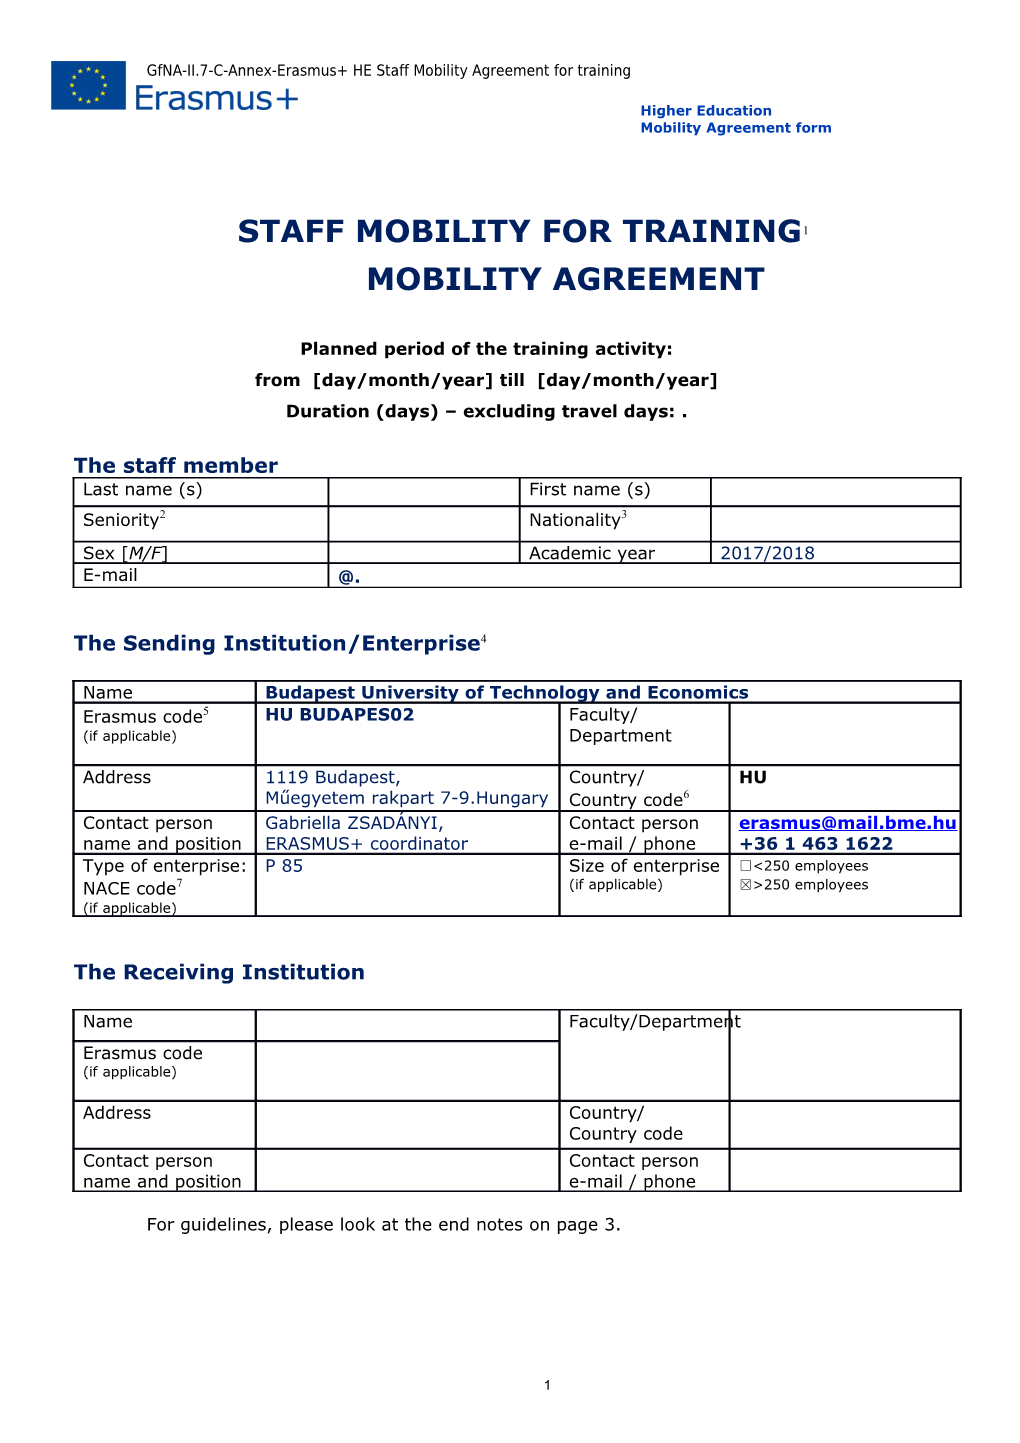 Gfna-II.7-C-Annex-Erasmus+ HE Staff Mobility Agreement for Training